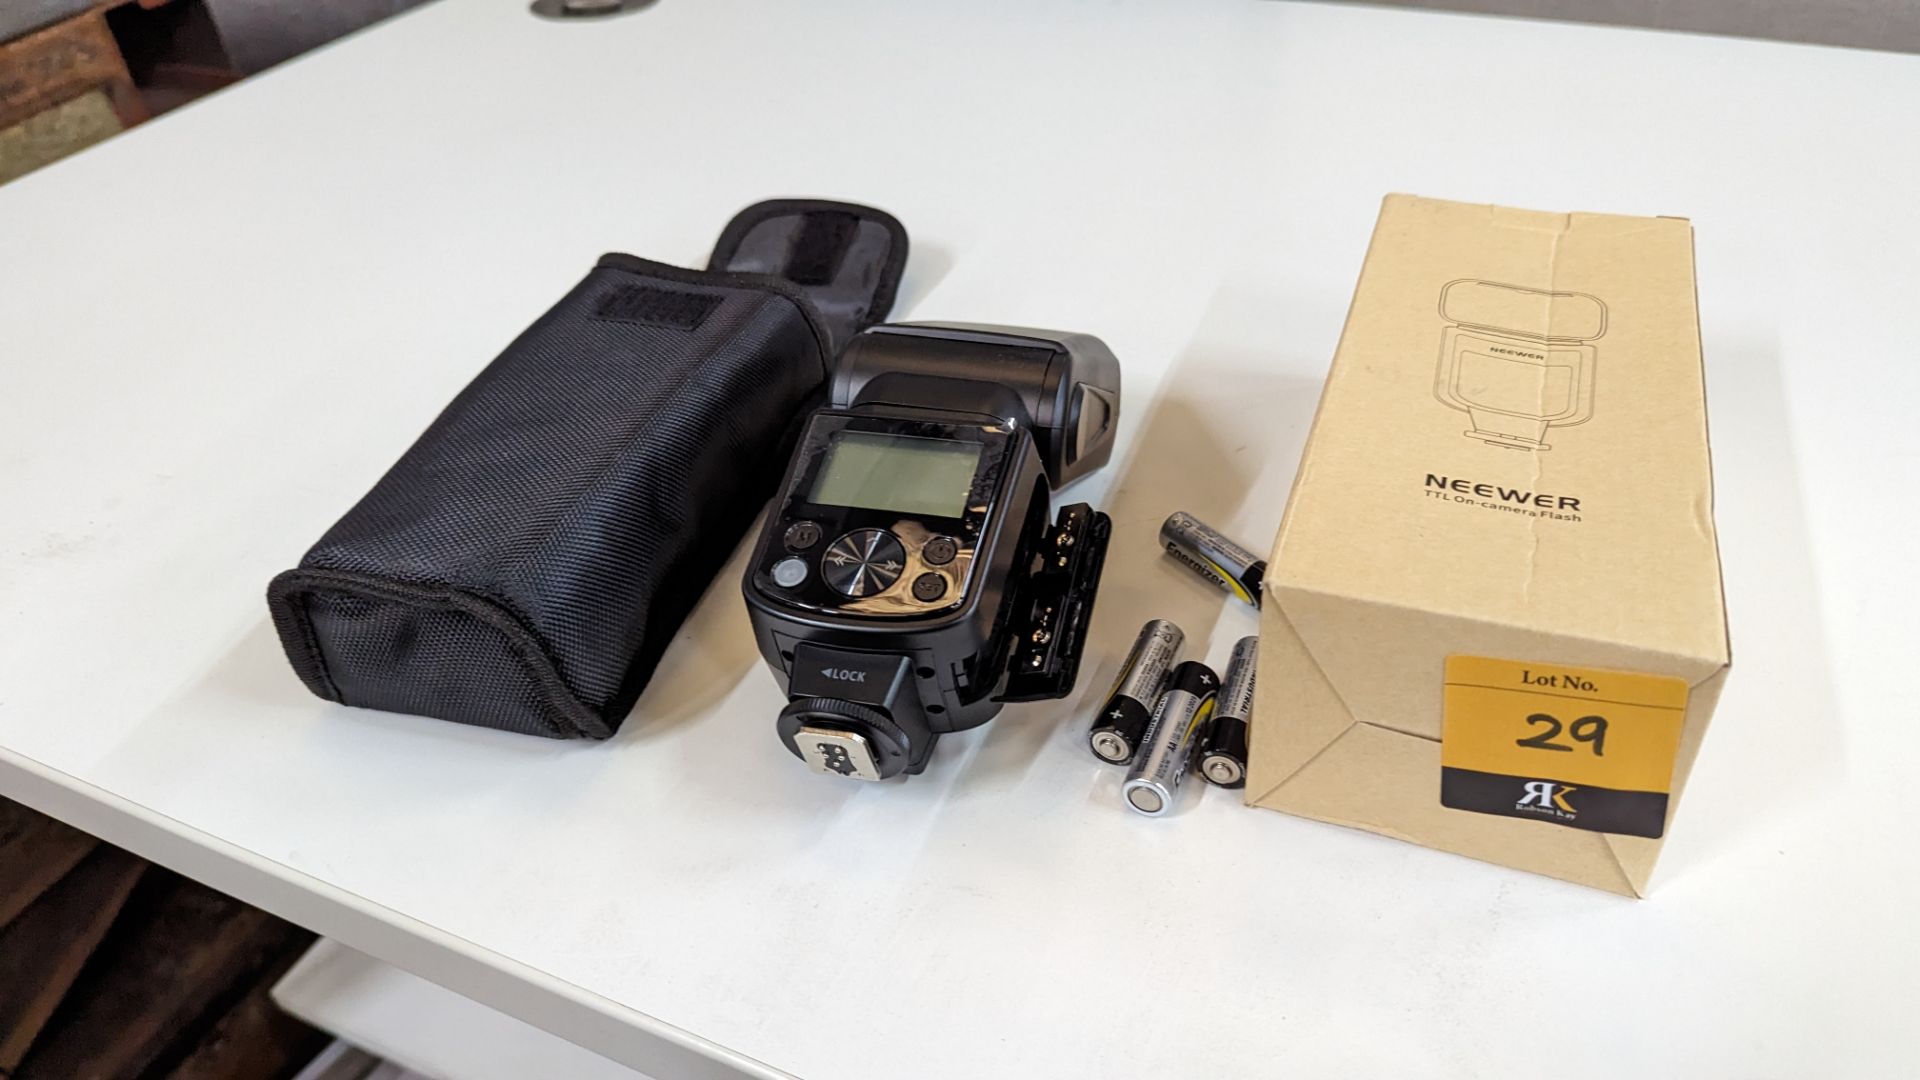 Neewer TTL flash unit model NW-670. This lot includes box, carry case and mounting bracket - Image 2 of 14